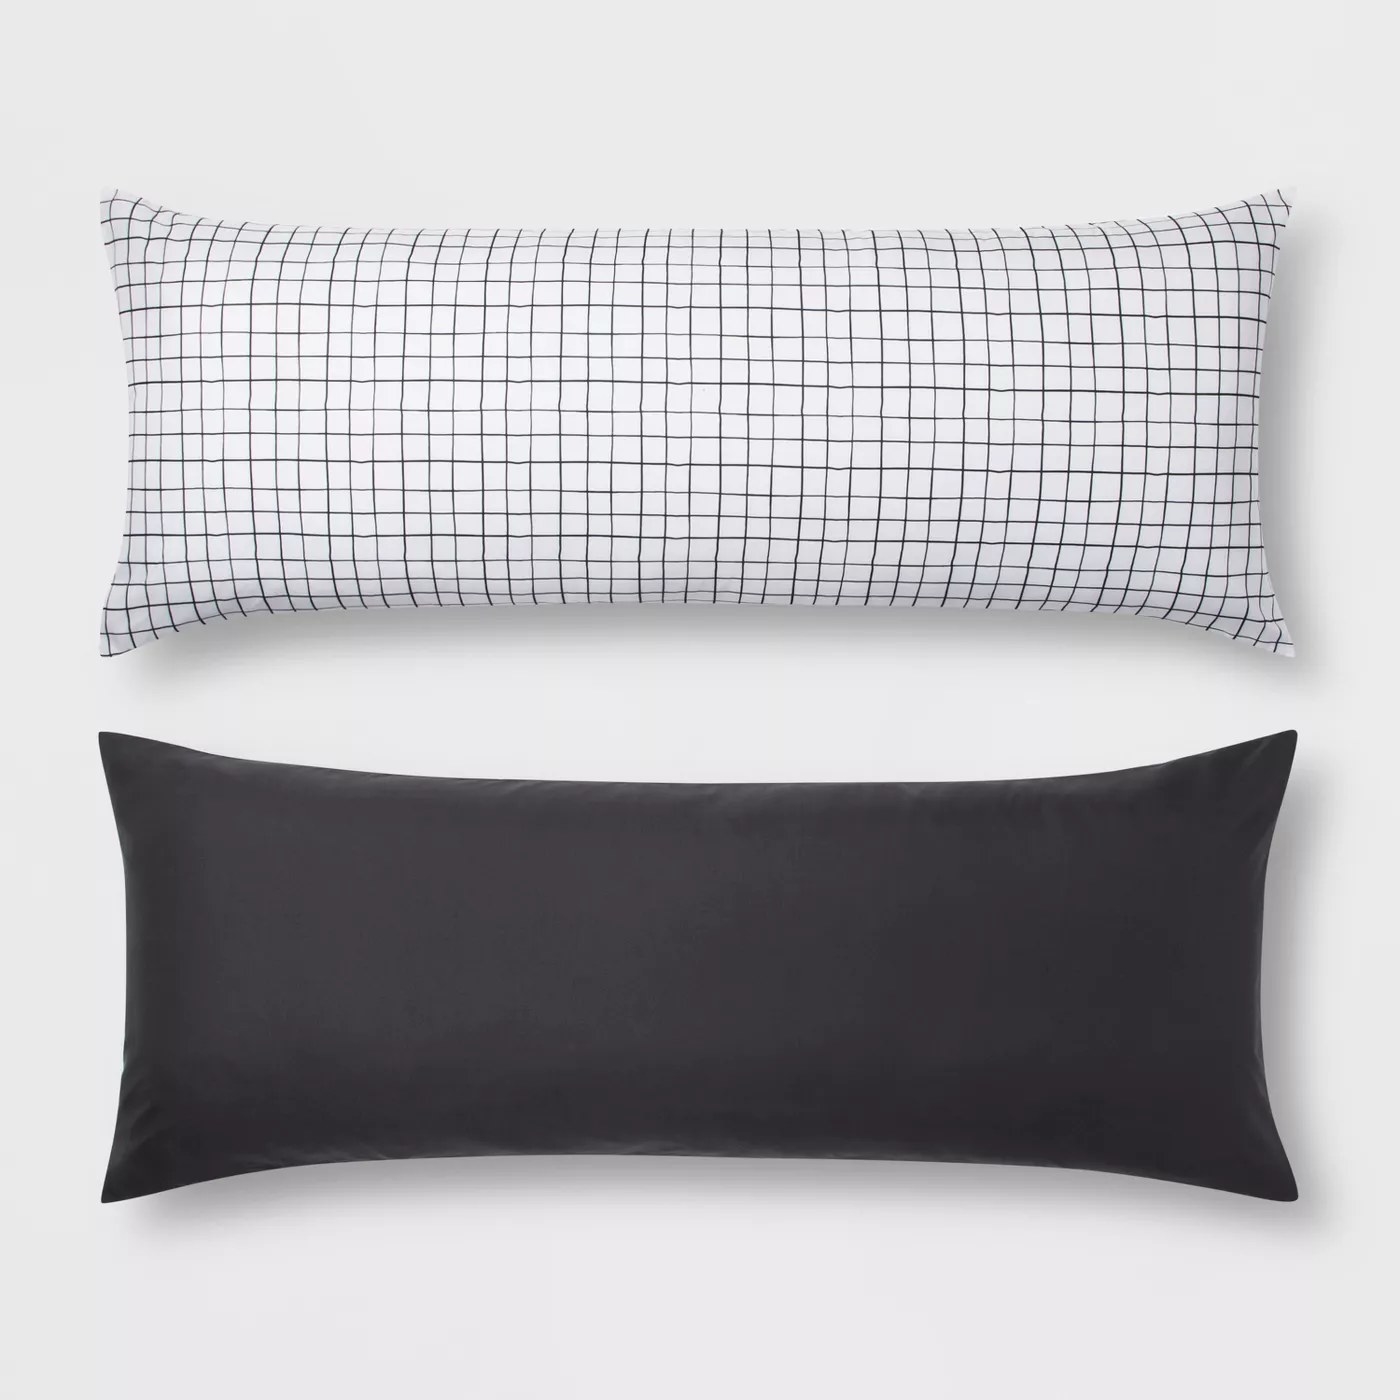 A white body pillow with a black, checkered print and a solid black body pillow